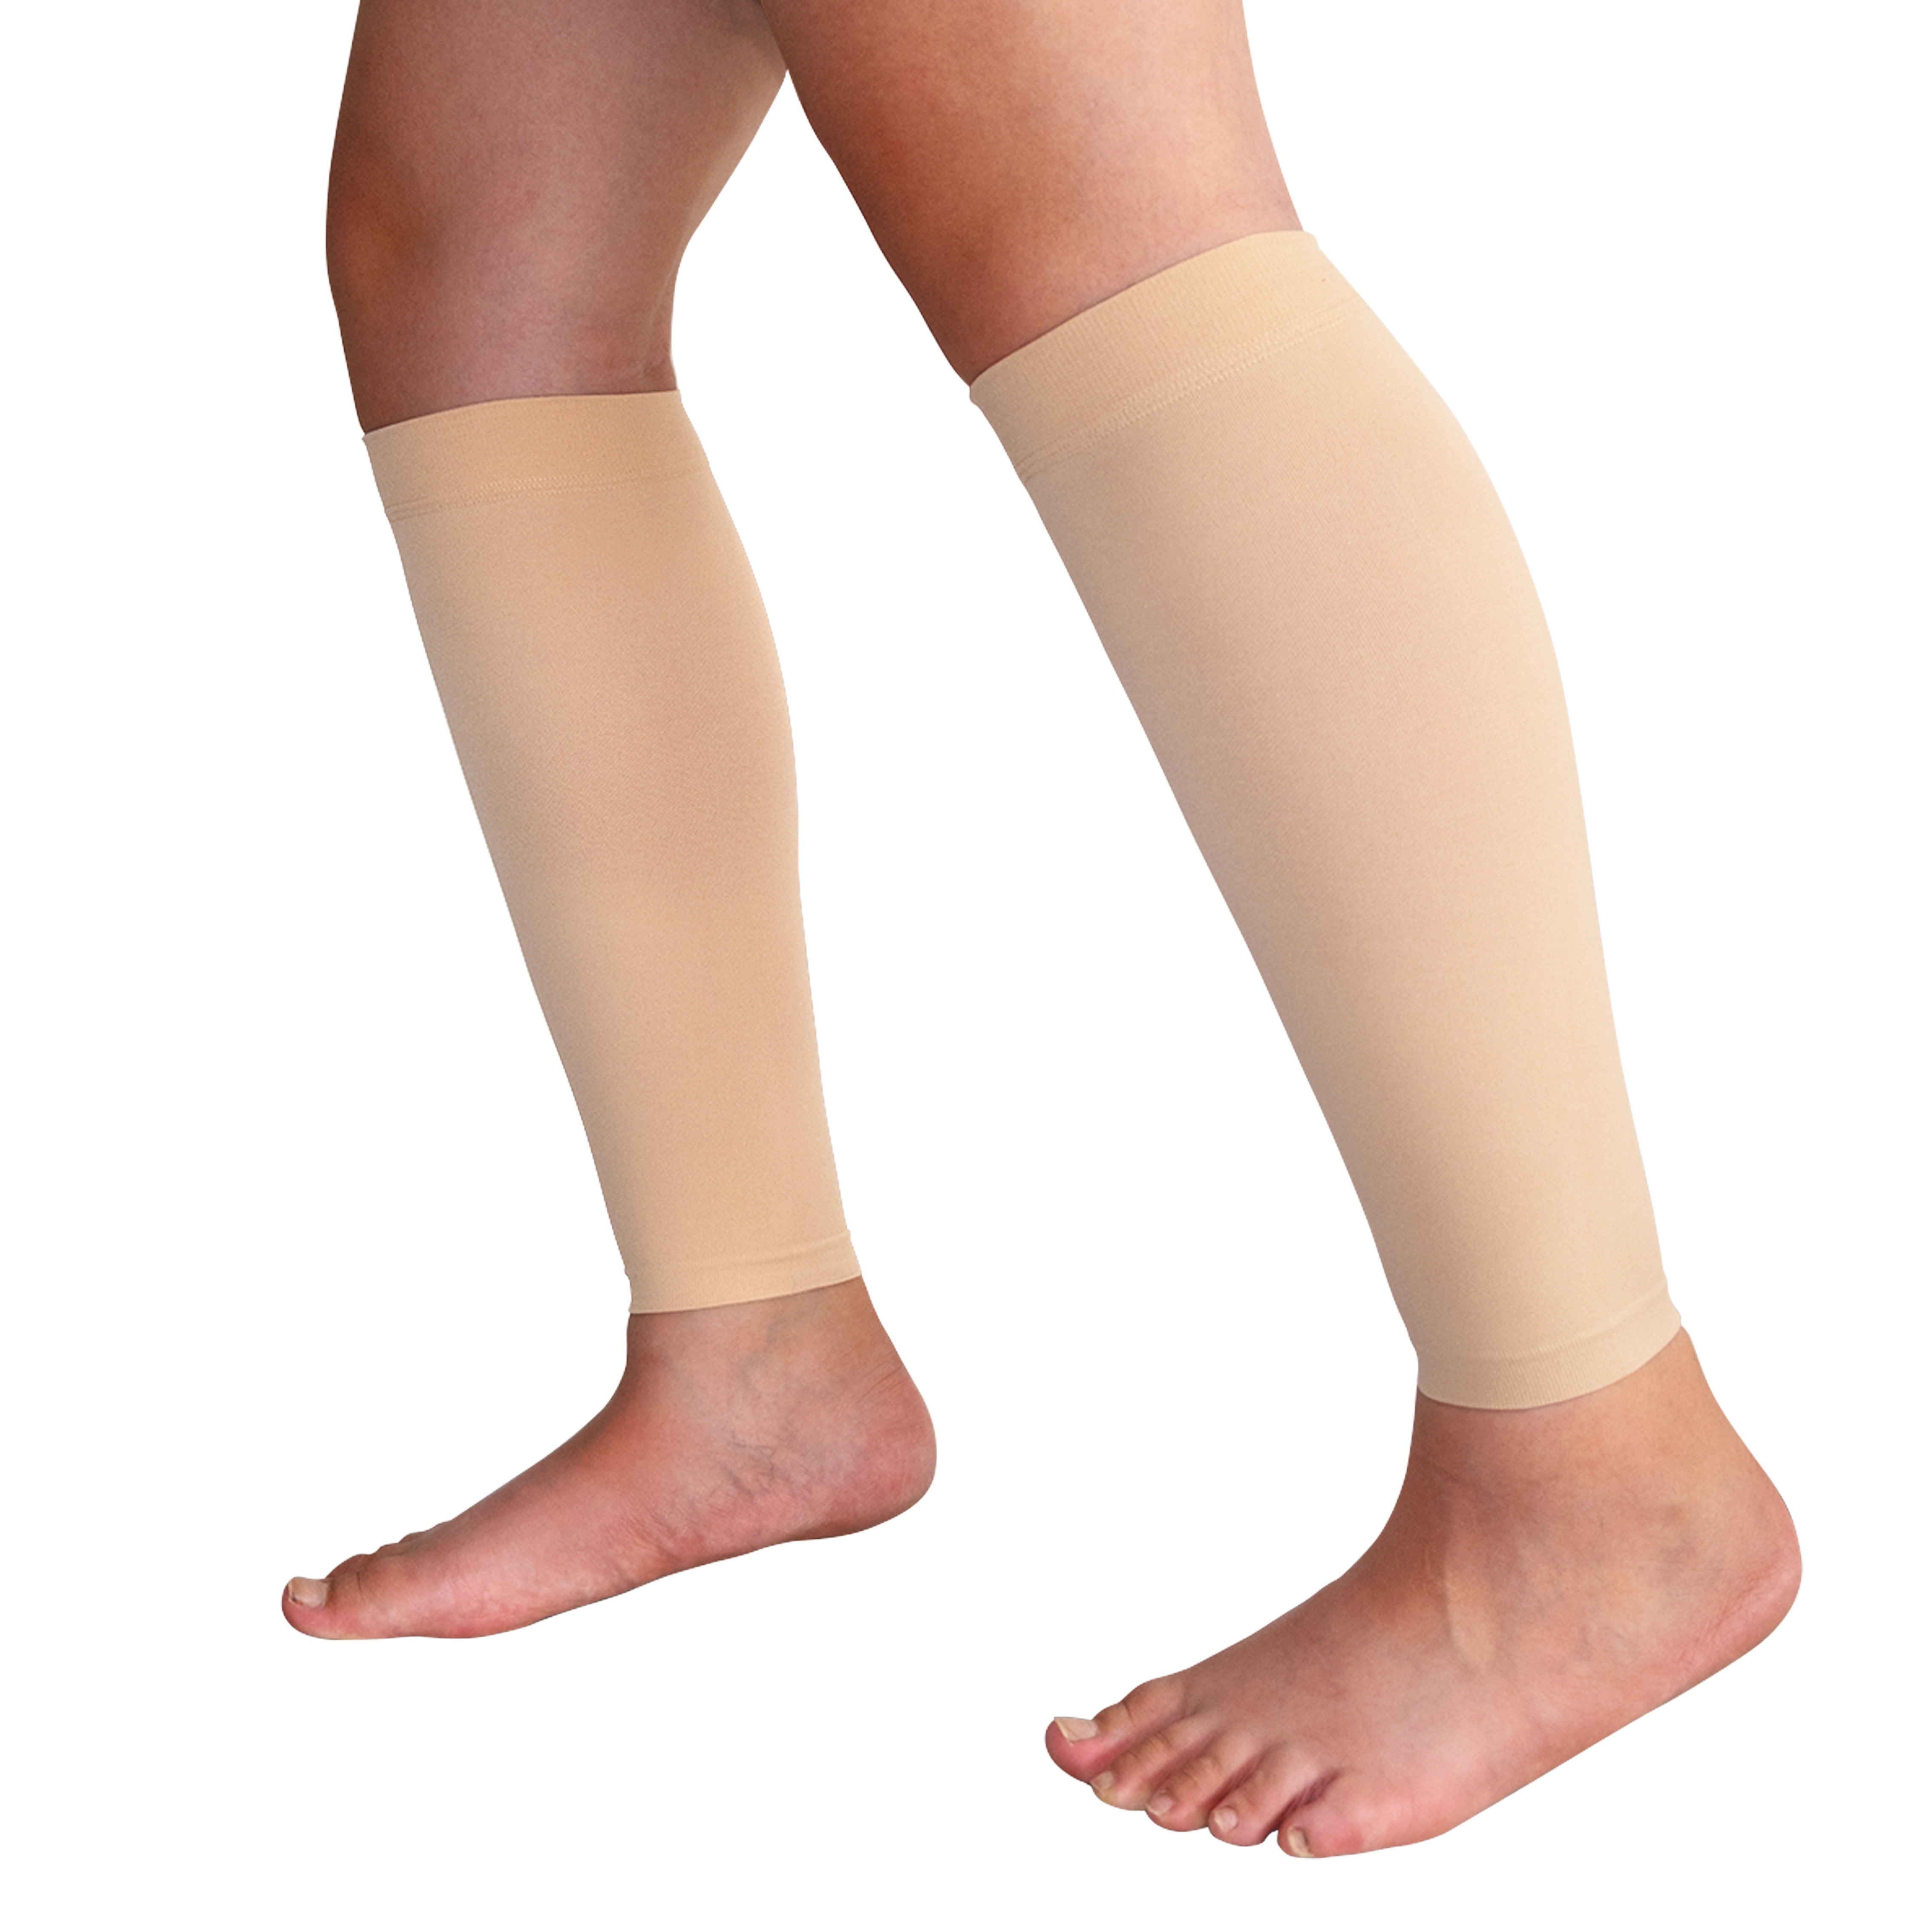 1Pair Sports Calf Support Sleeves Leg Footless Compression Socks